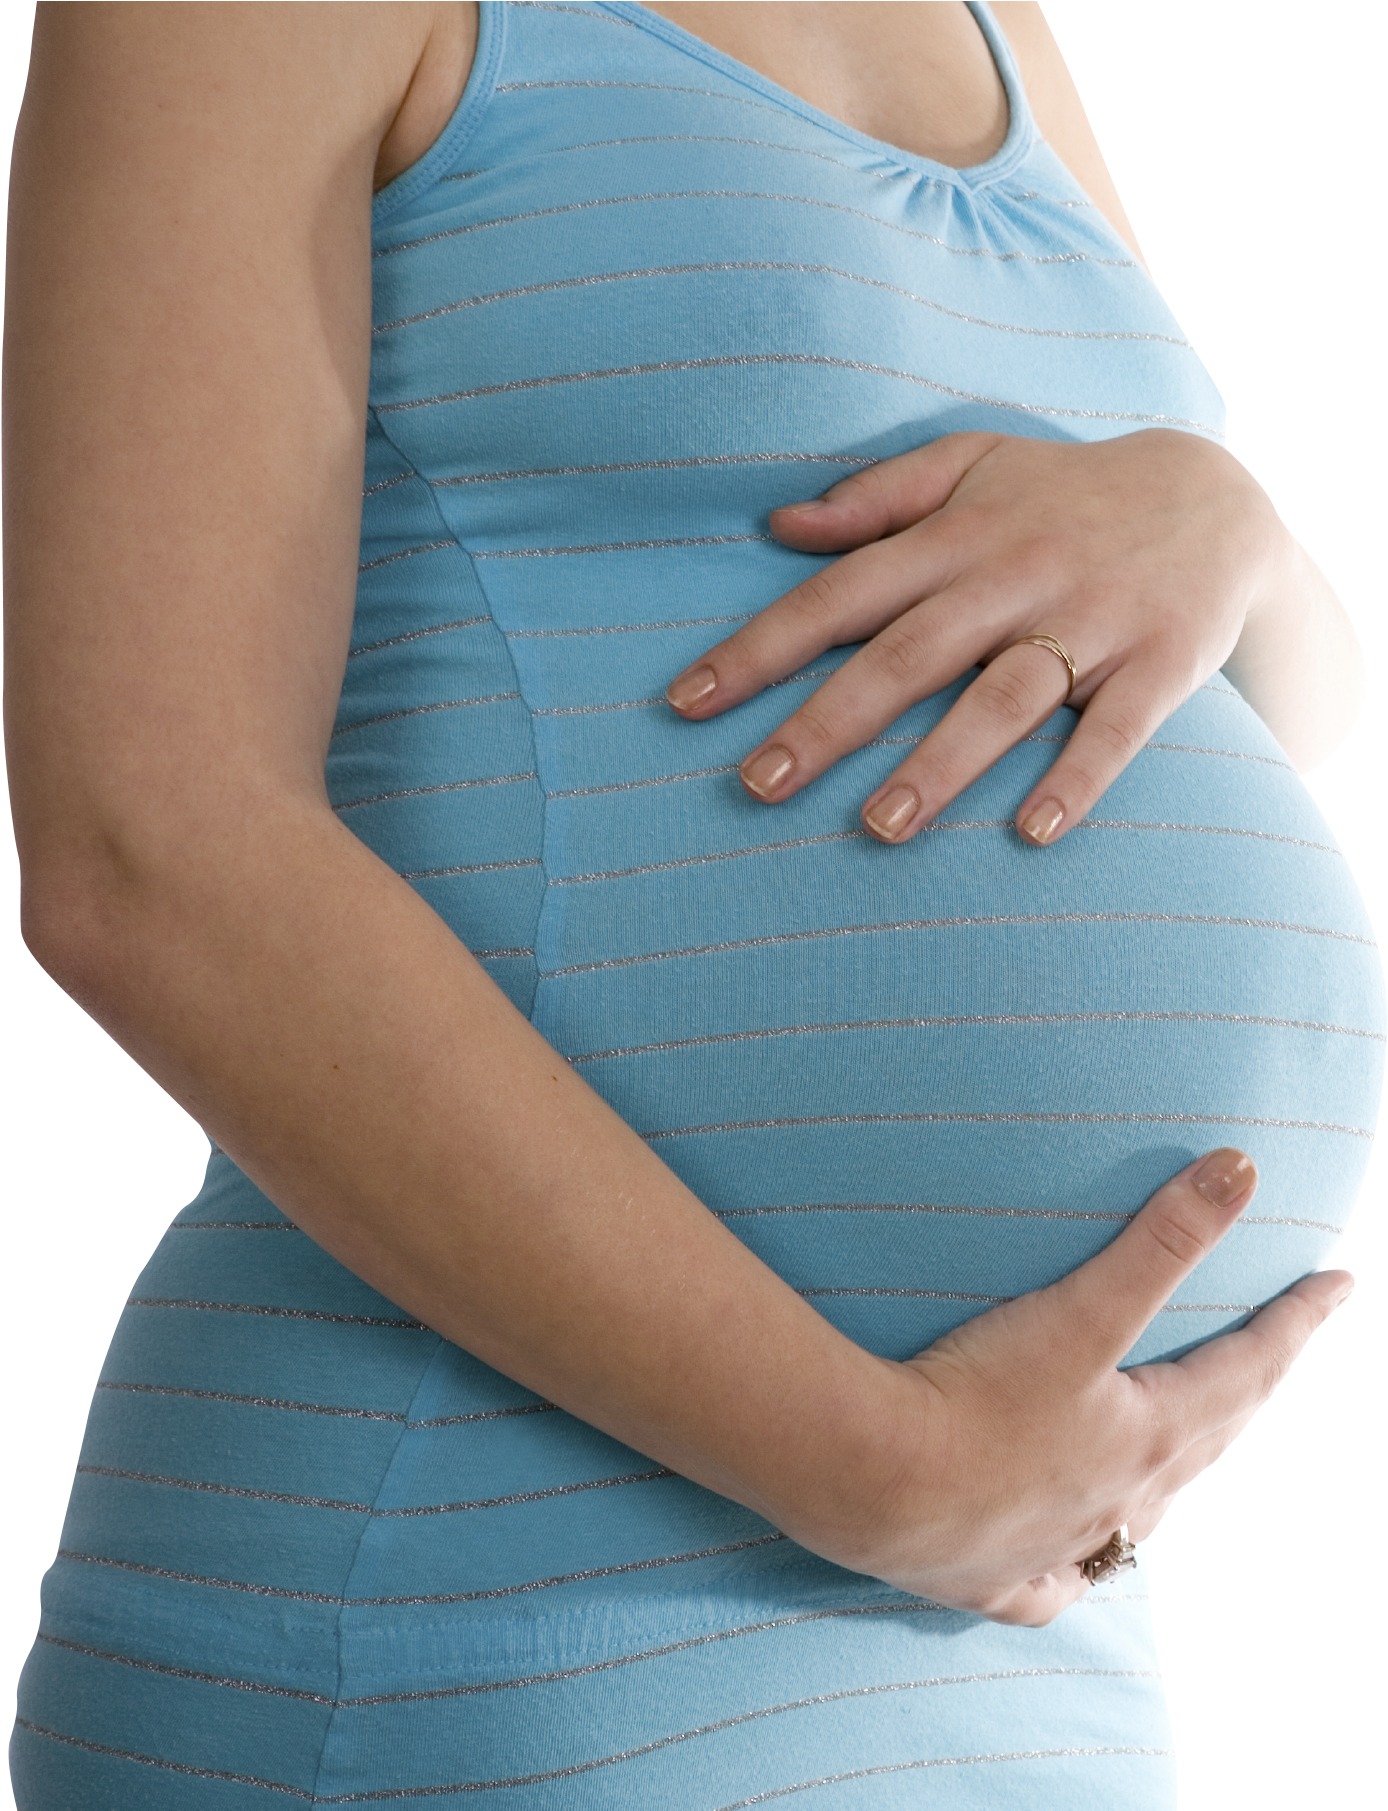 A Pregnant Woman Holding Her Belly